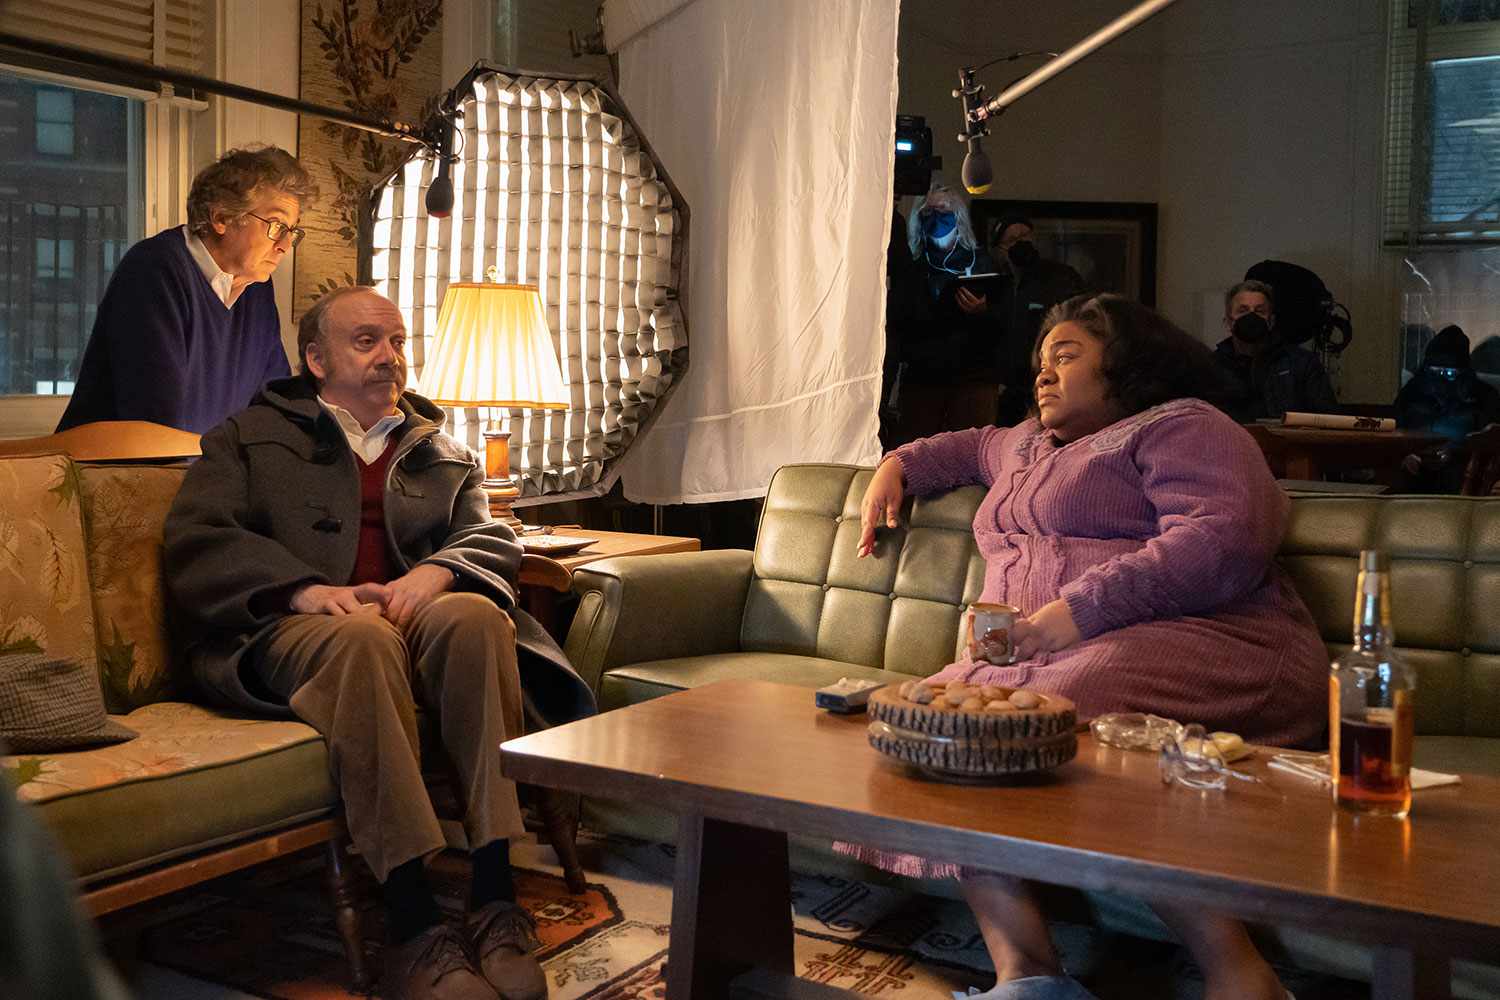 HO_00837_R (l-r.) Director Alexander Payne and actors Paul Giamatti and DaâVine Joy Randolph on the set of their film THE HOLDOVERS, a Focus Features release. Credit: Seacia Pavao / Â© 2023 FOCUS FEATURES LLC